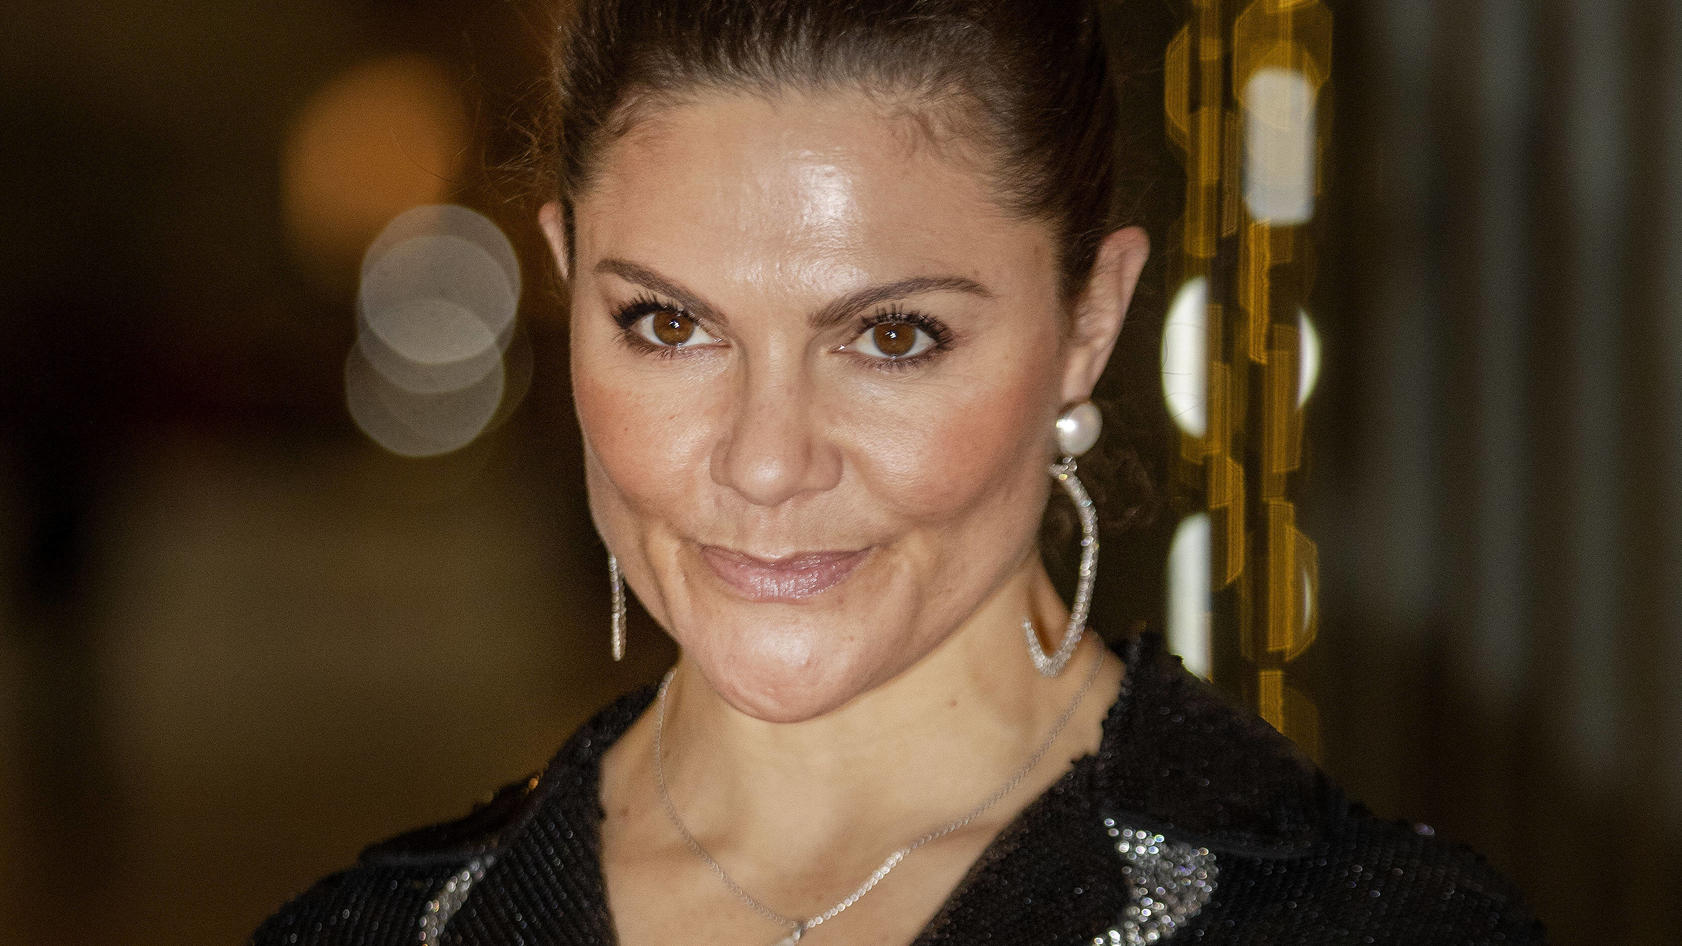  06-12-2021 Princess Victoria during the award ceremony for the best Swedish subsidiary in France at La Pavillon Vendome on her 2nd day of her 3 day visit to Paris, France.  PUBLICATIONxINxGERxSUIxAUTxONLY Copyright: xPPEx